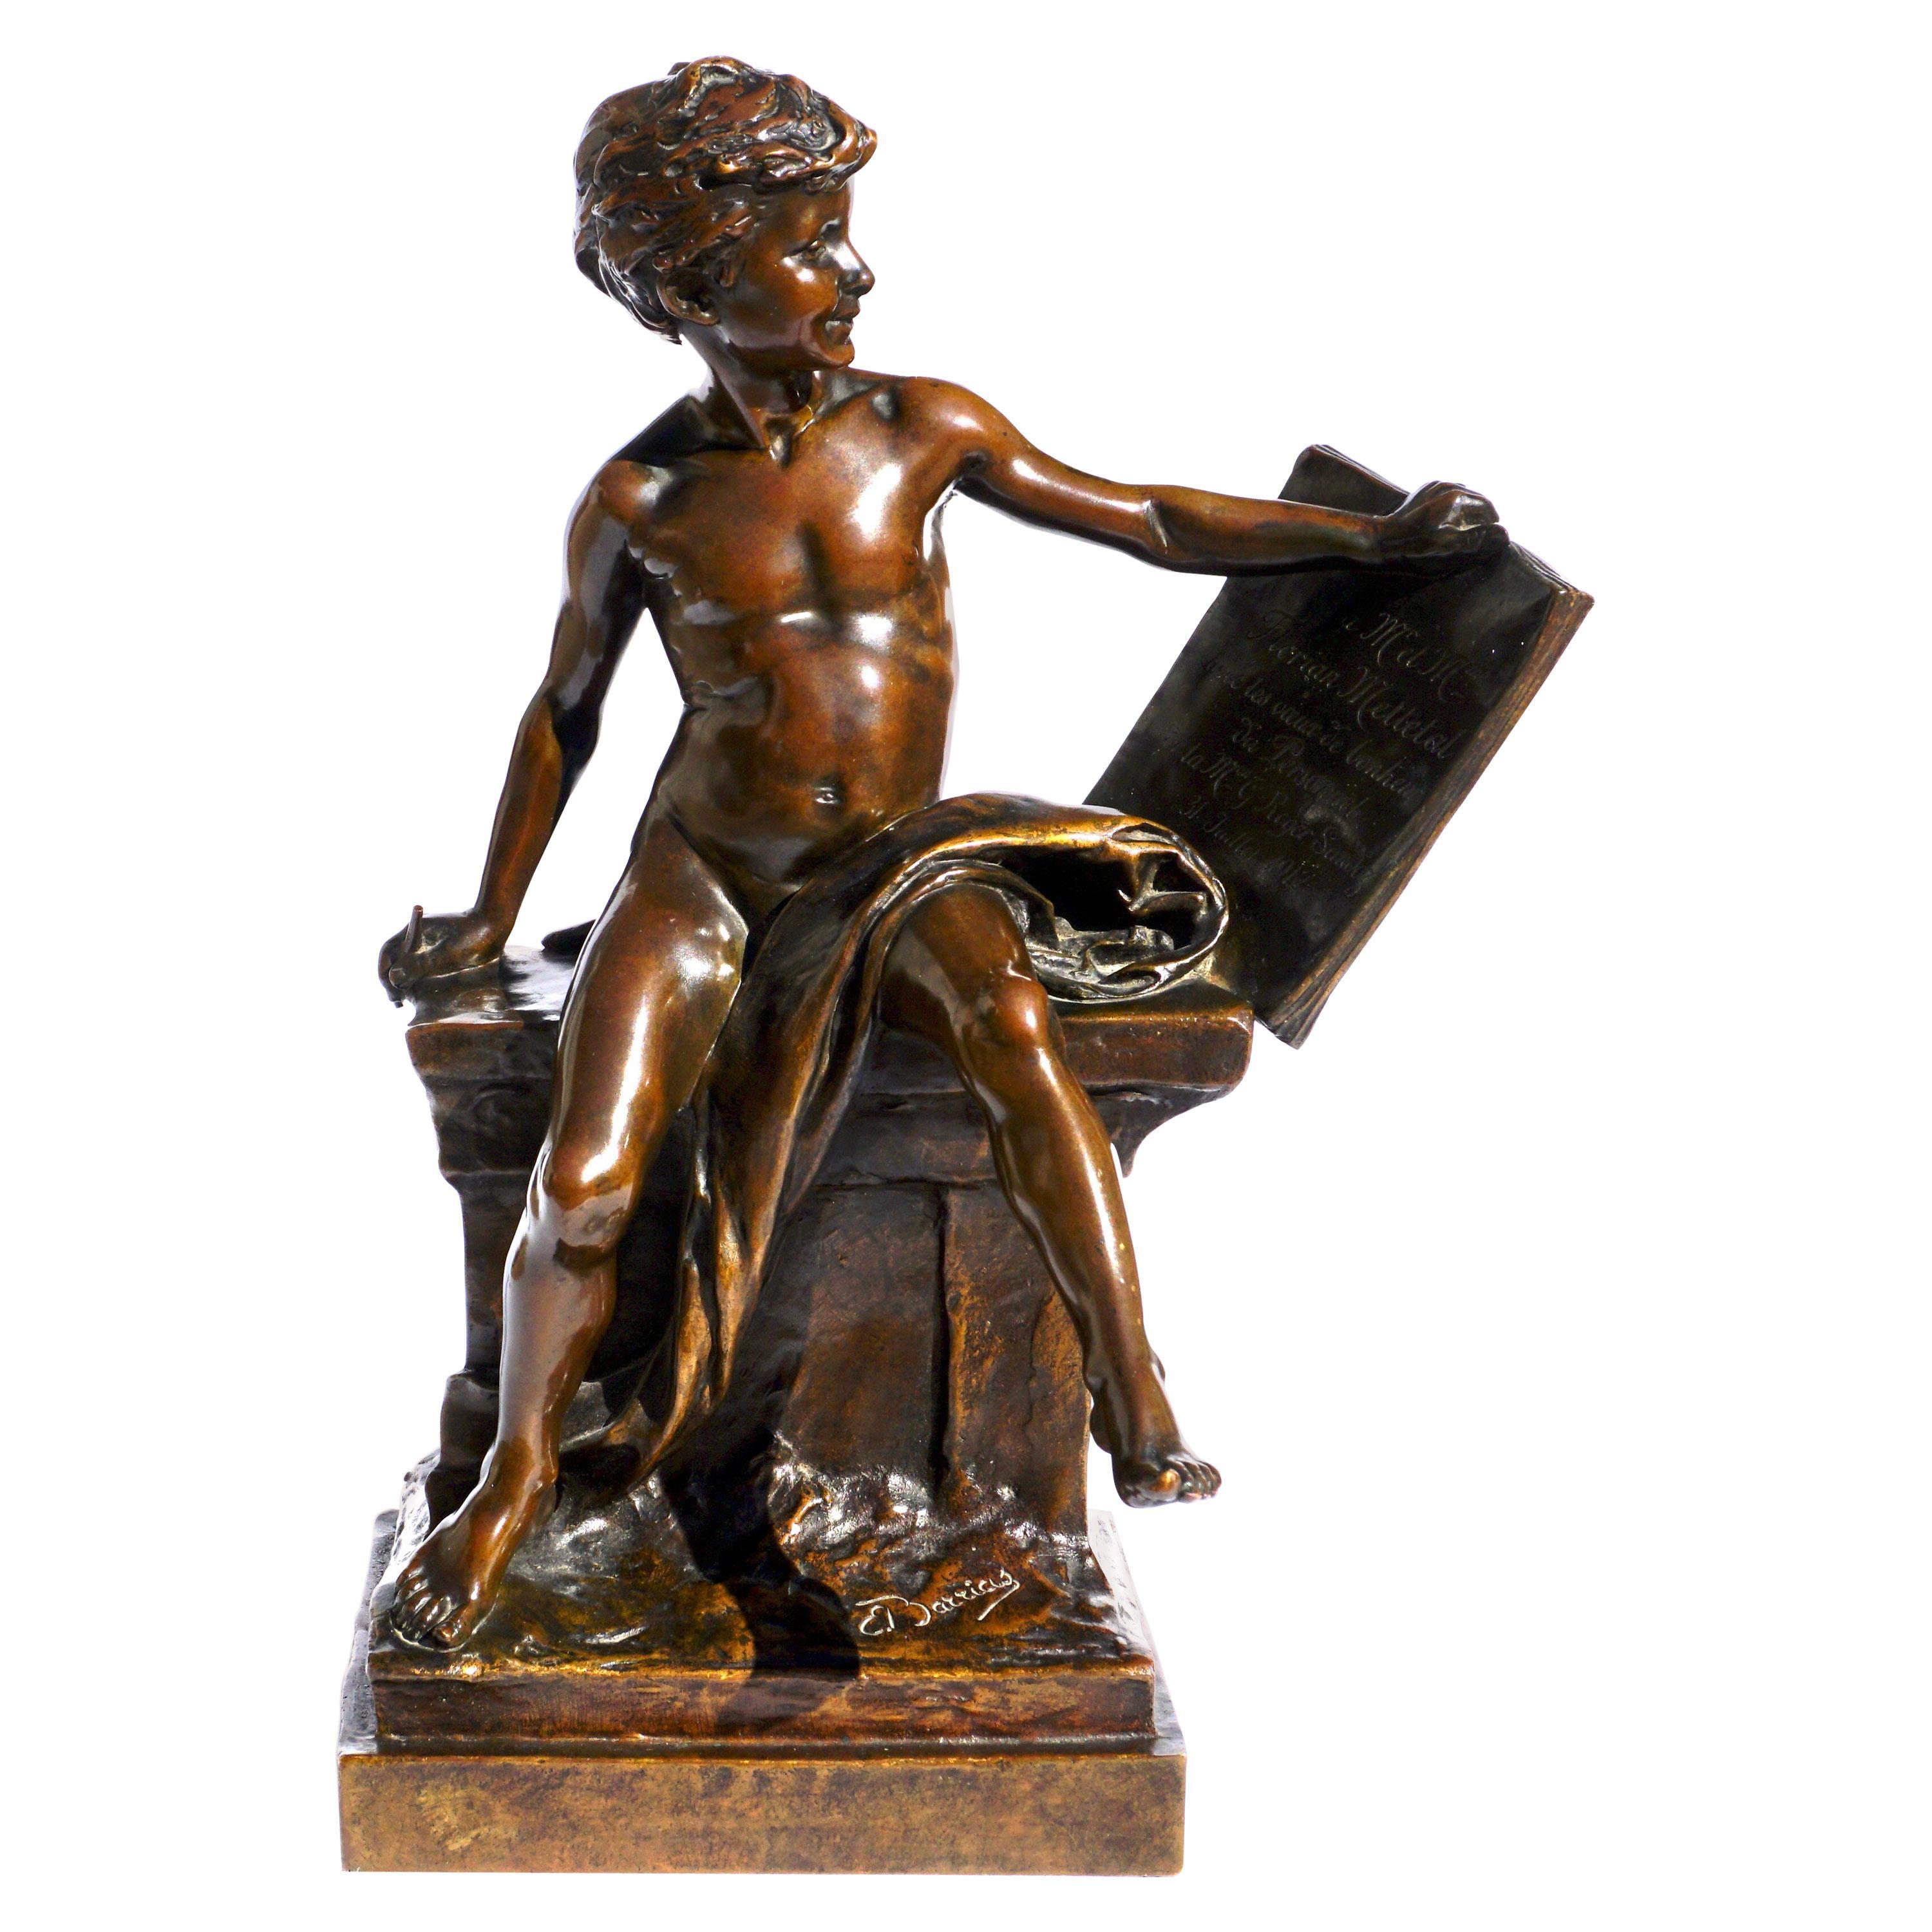 French dore bronze depicting a seated figure of a boy with tablet by Louis Ernest Barrias, French(1841-1905) Circa 1912 

Modeled as a partially nude youth seated with a tablet and pen, incised E. Barrias and Susse Frères and Susse Frères pastille